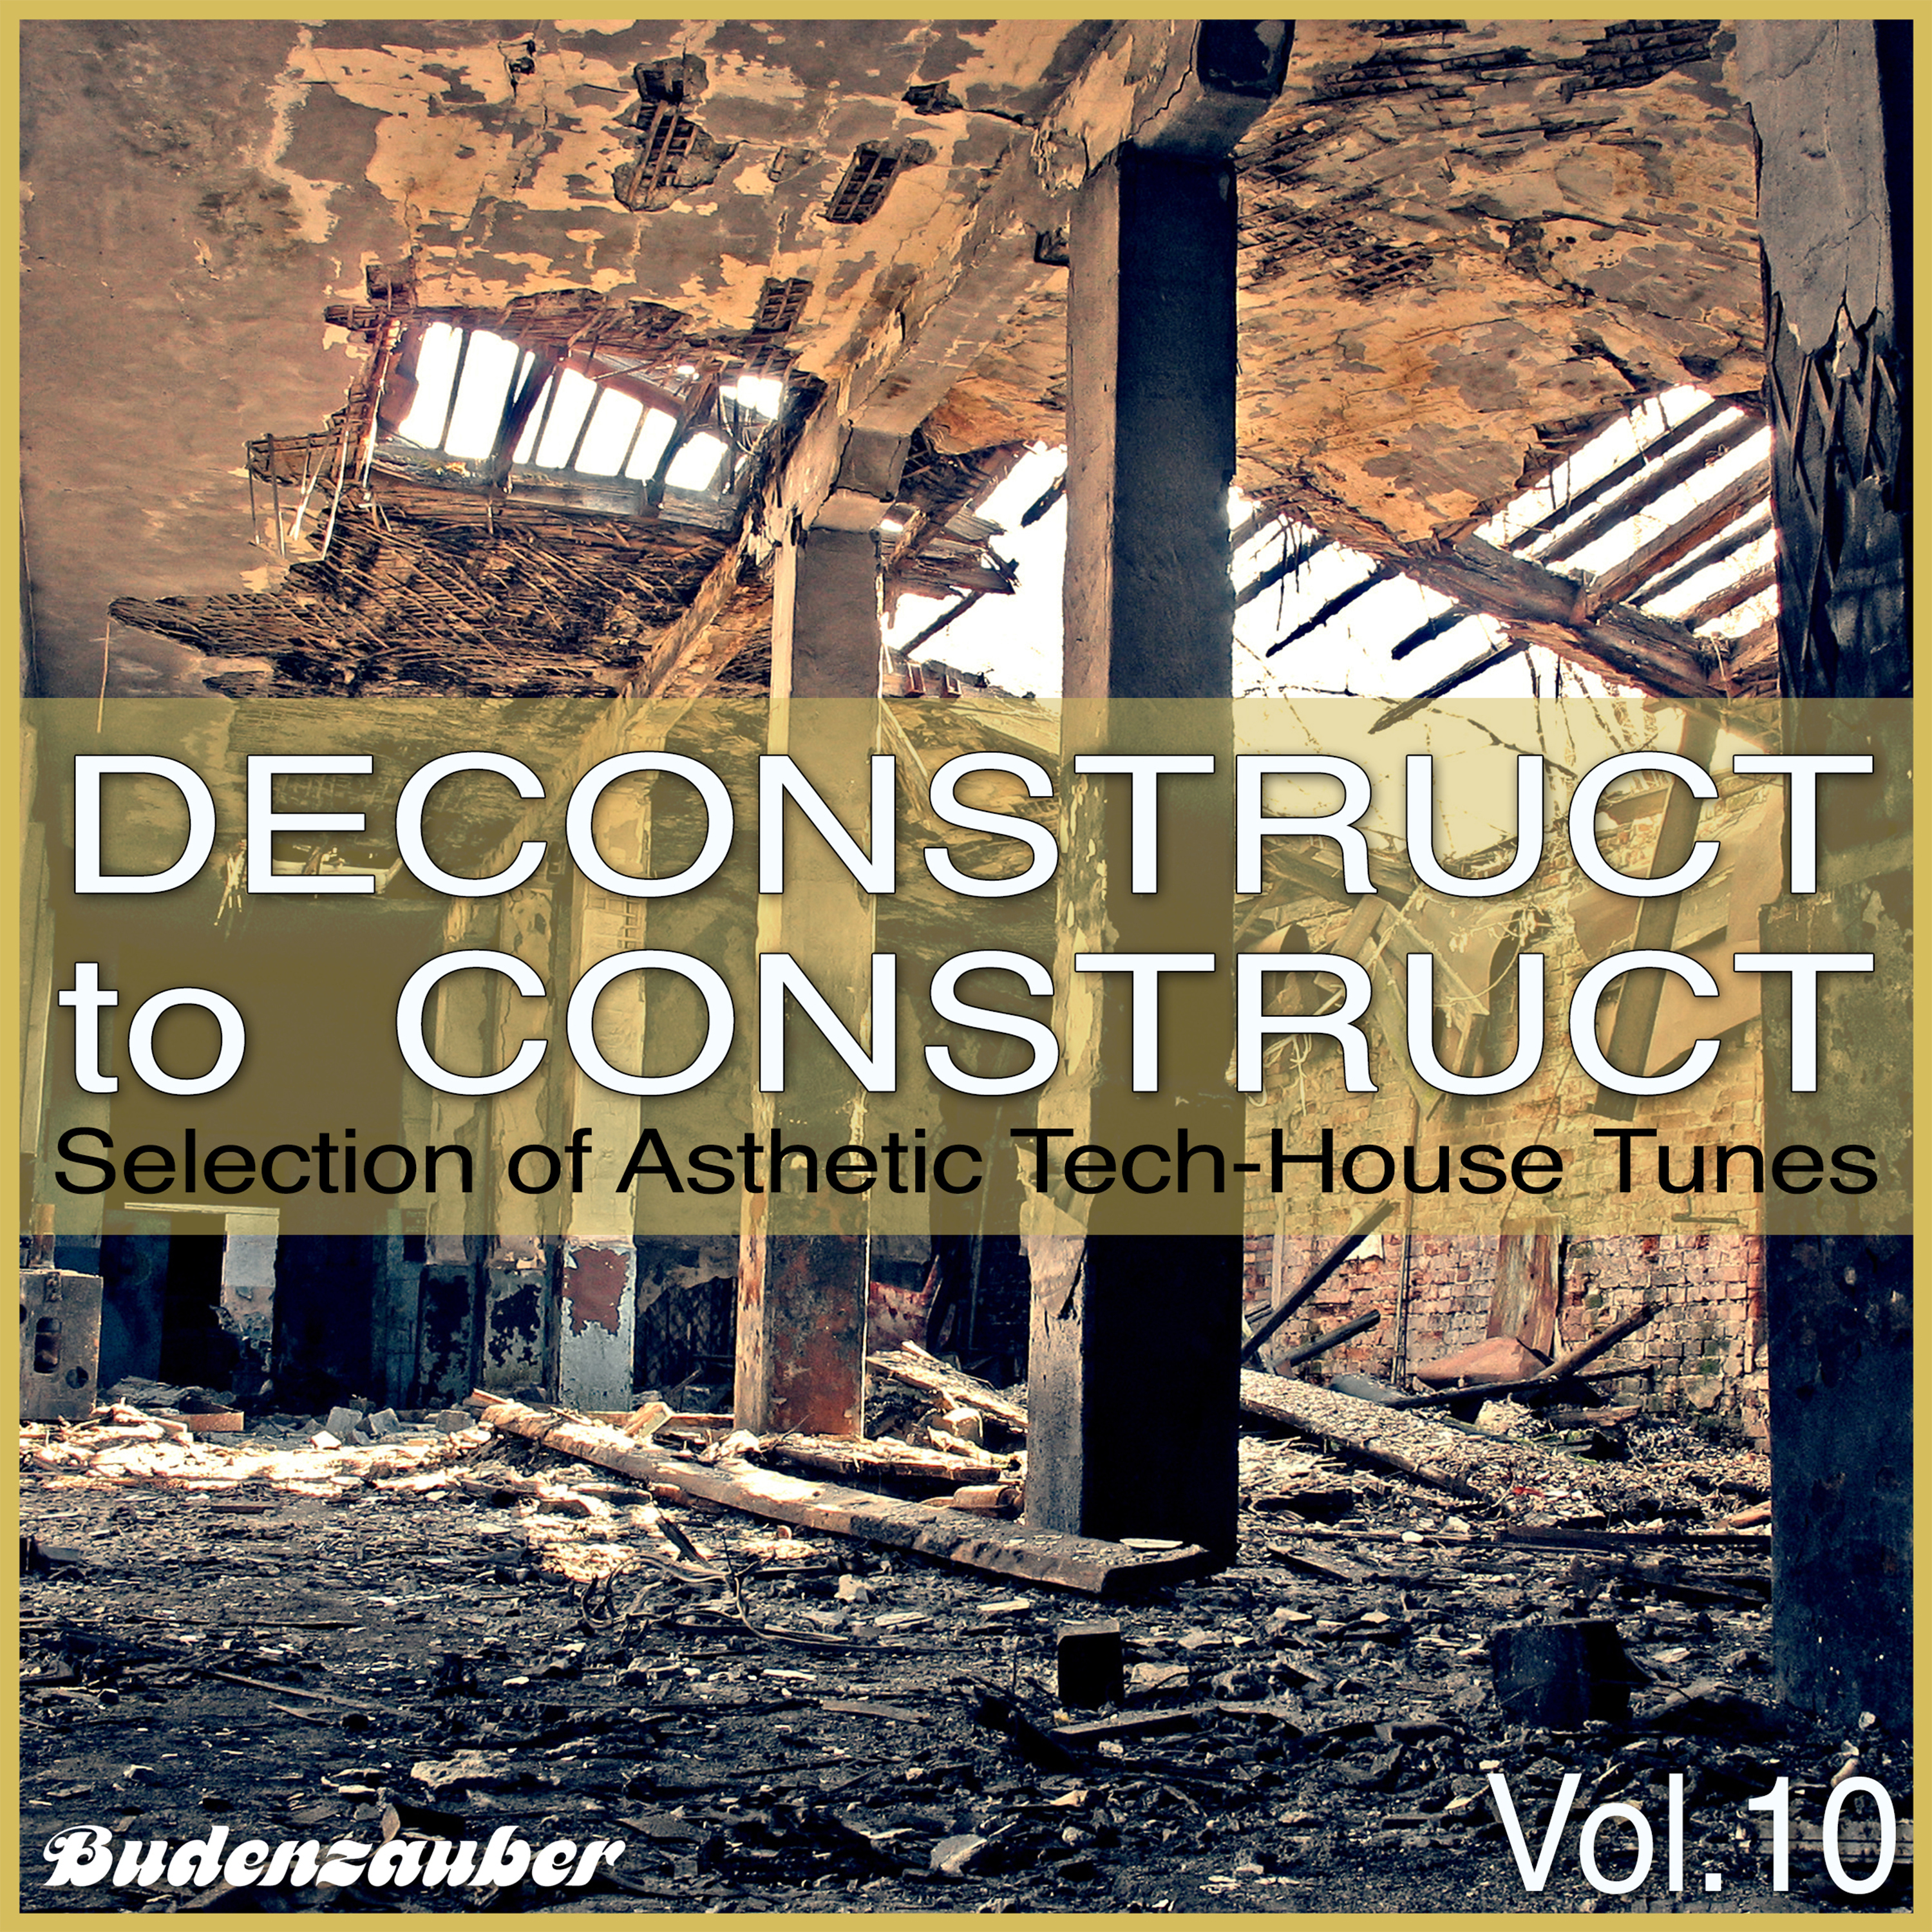 Deconstruct to Construct, Vol. 10 - Selection of Asthetic Tech-House Tunes